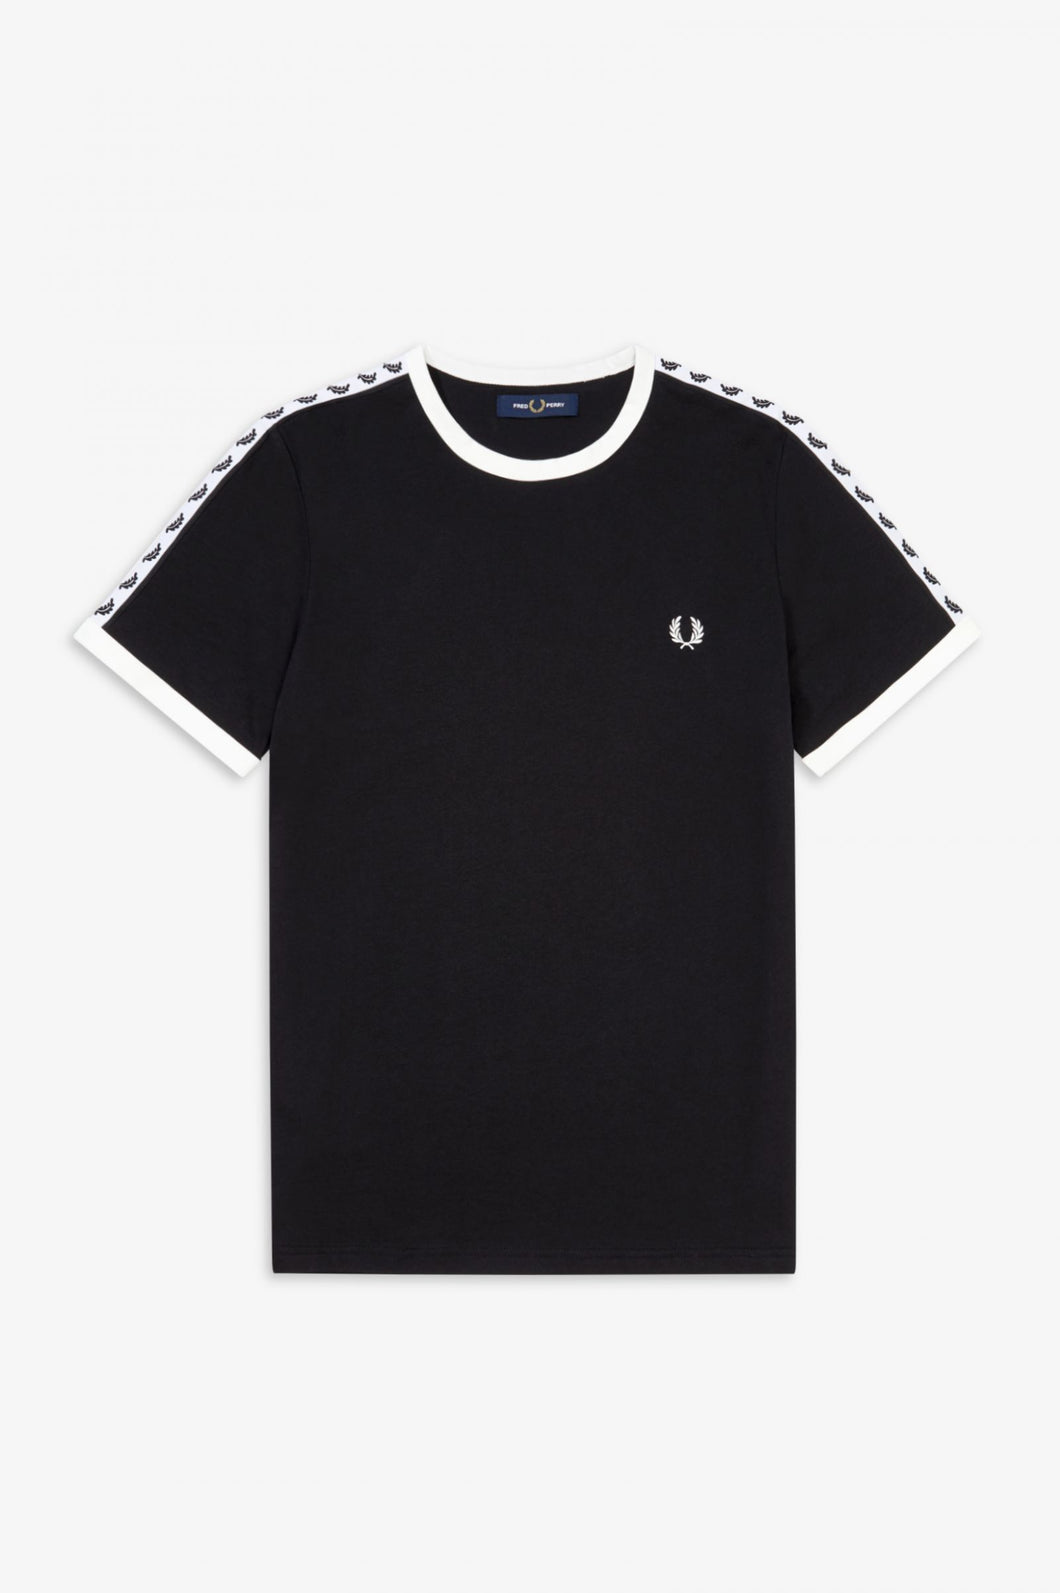 Fred Perry Black Taped Ringer T-shirt